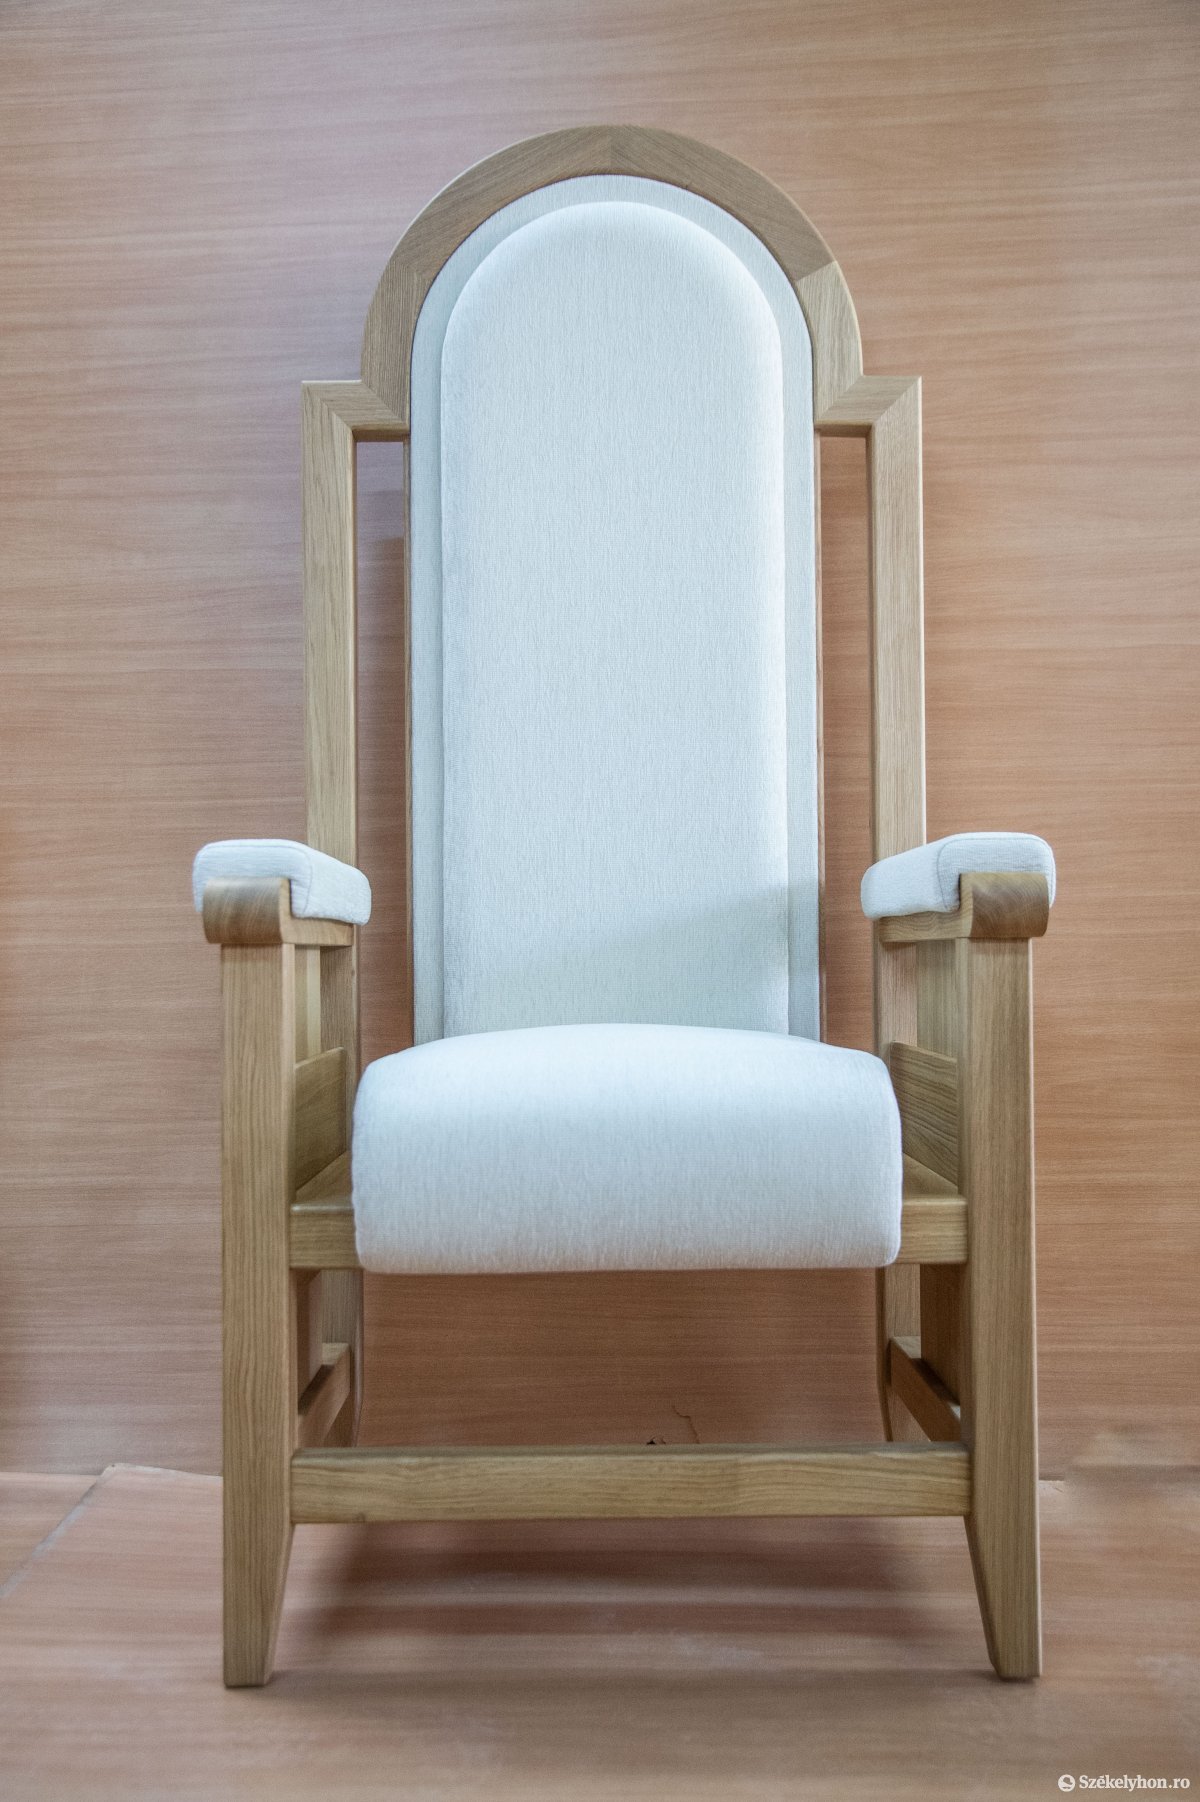 Pope Francis' chair